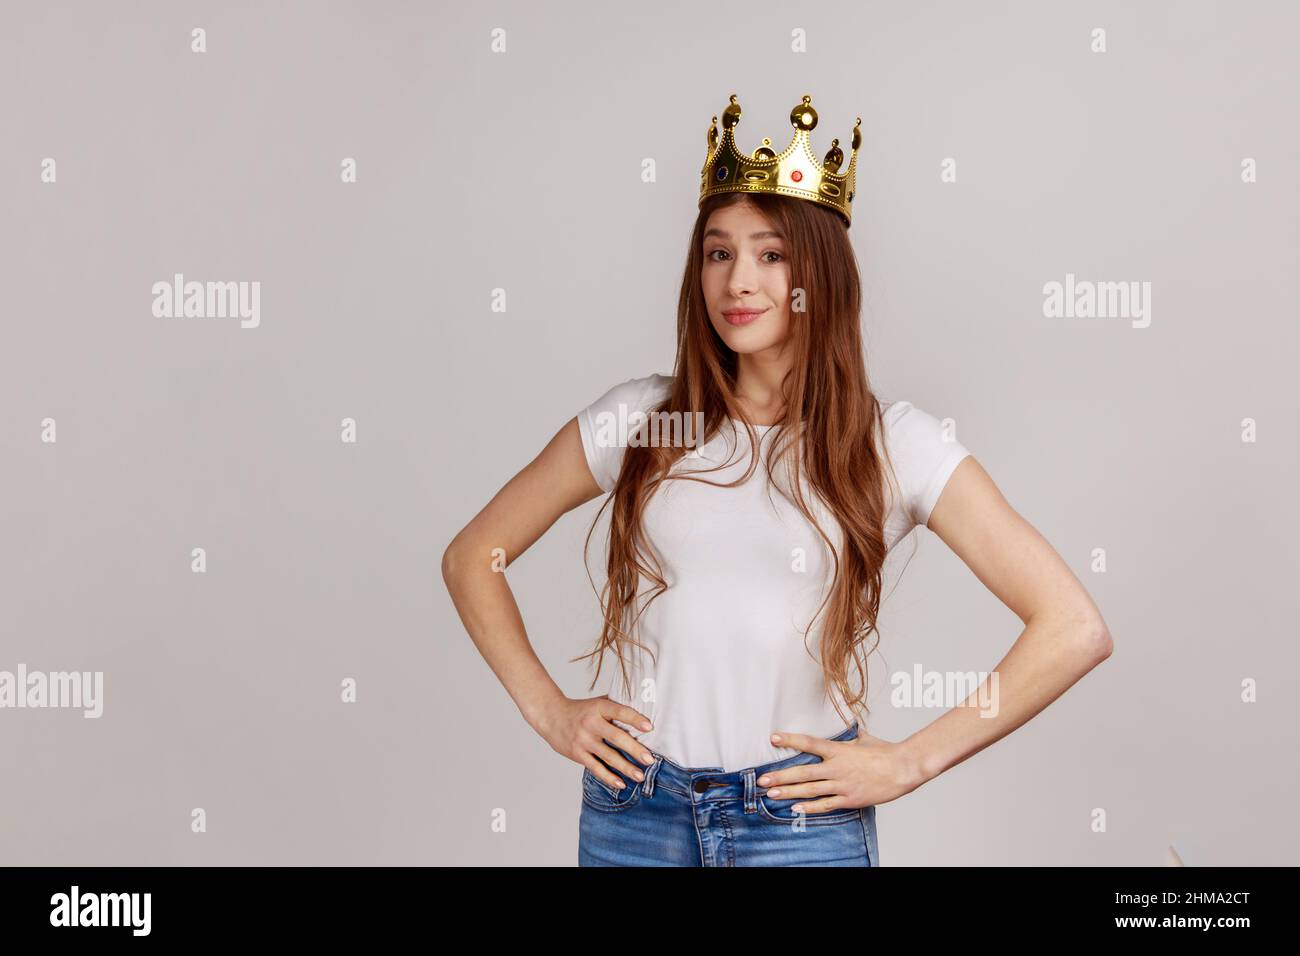 Portrait of young beautiful woman with crown on head keeping hands on hips, self-motivation and dreams to be best, wearing white T-shirt. Indoor studio shot isolated on gray background. Stock Photo